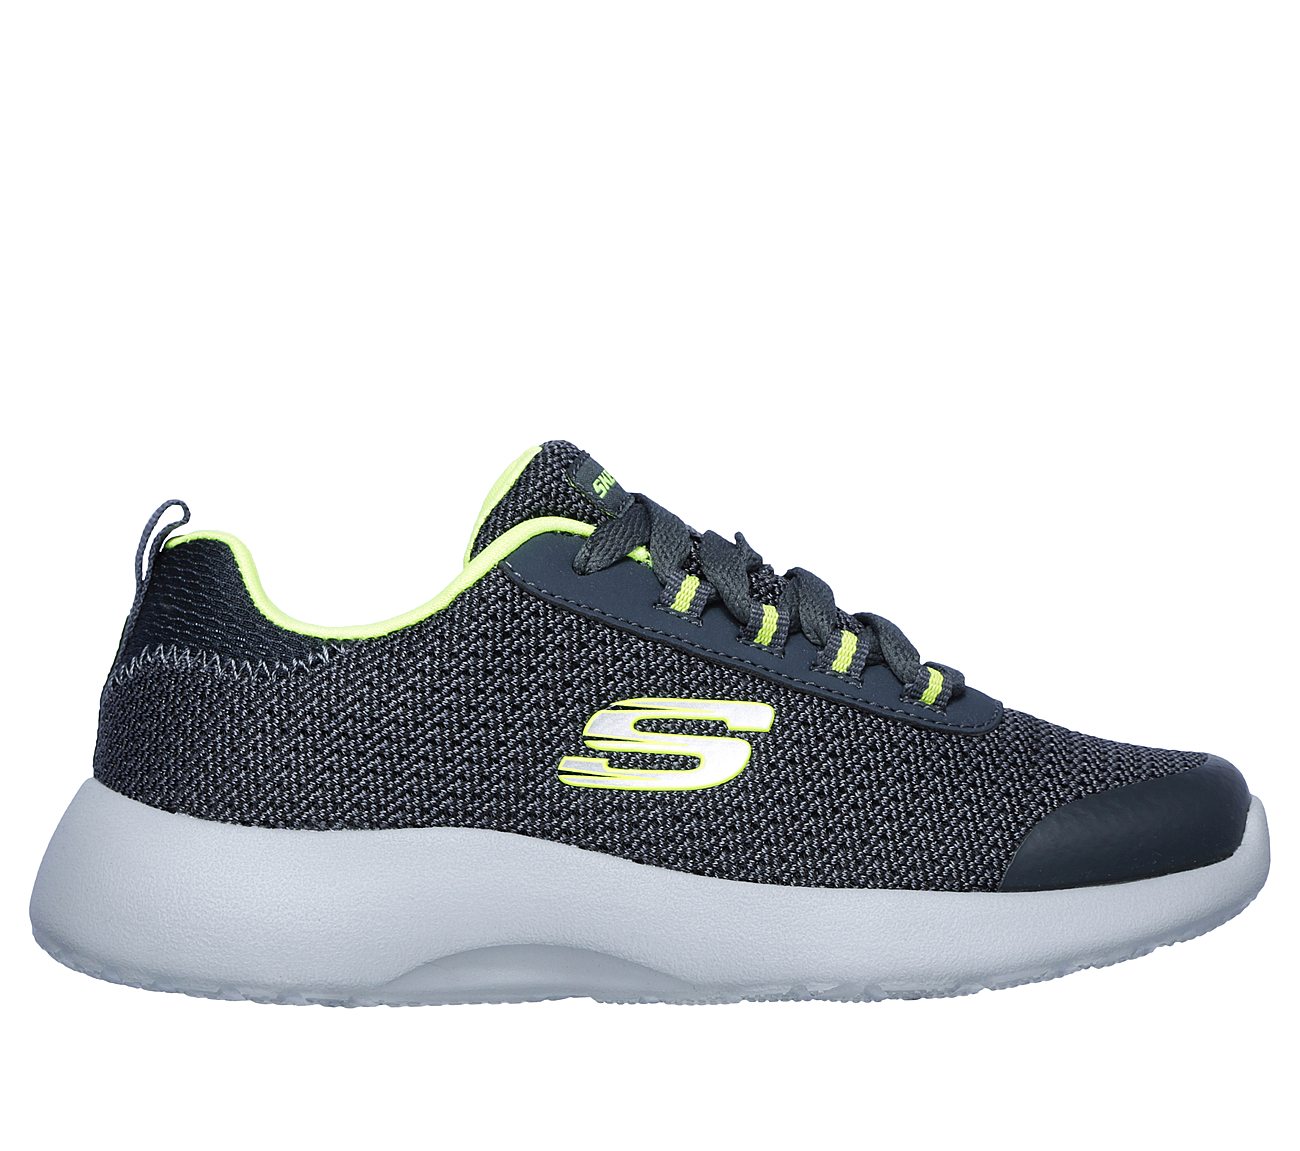 SKECHERS Dynamight - Turbo Dash Sport Shoes